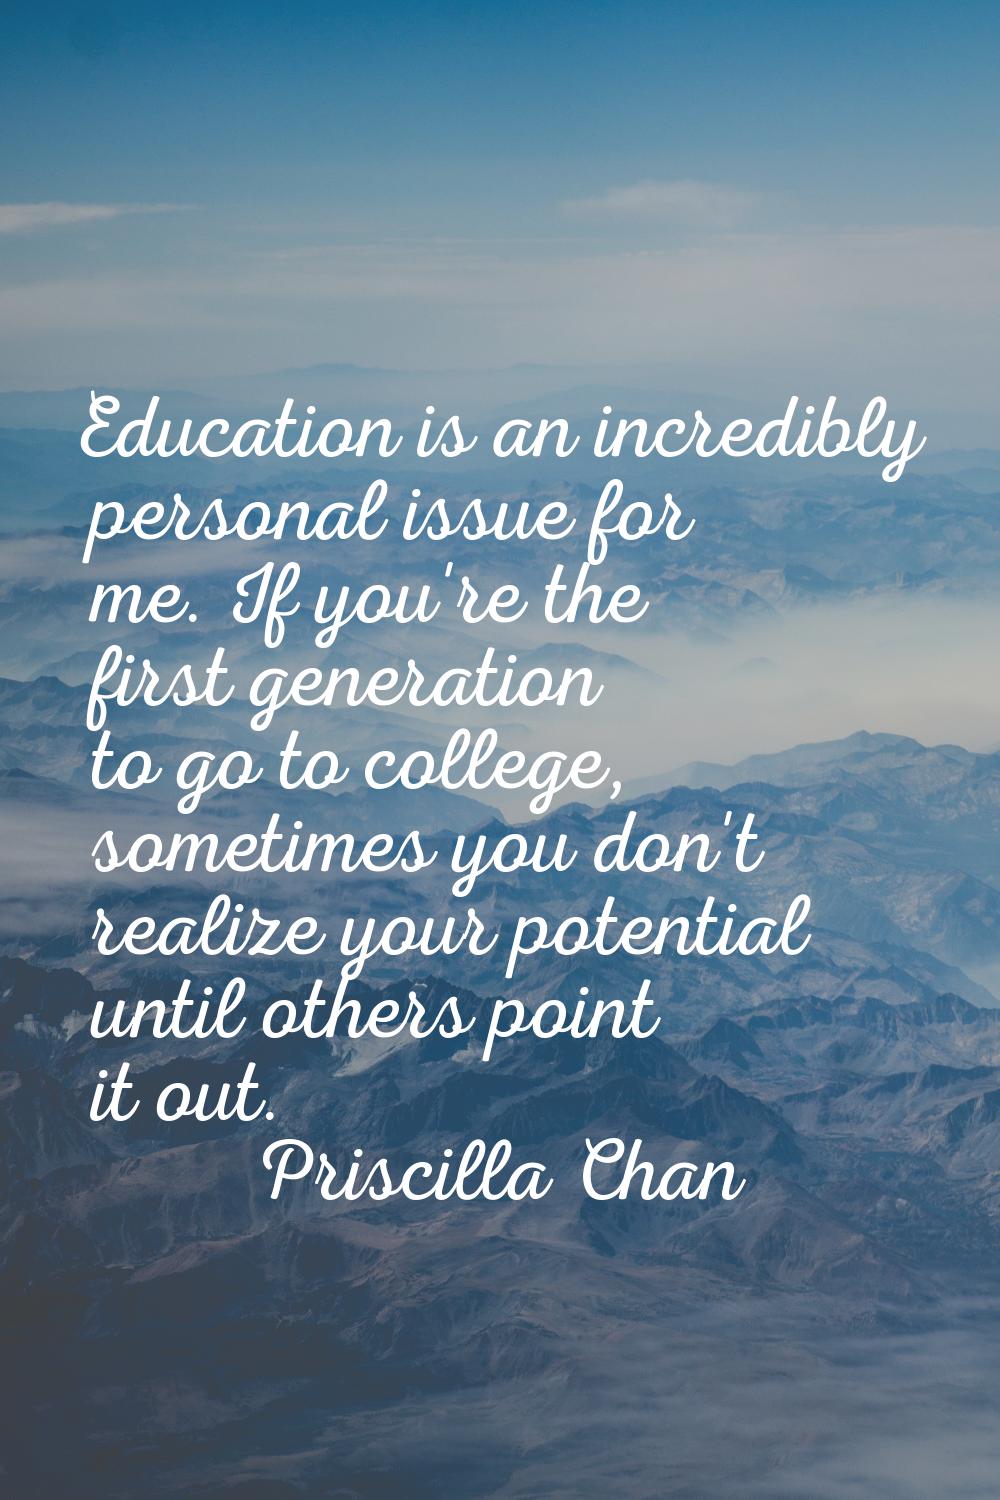 Education is an incredibly personal issue for me. If you're the first generation to go to college, 